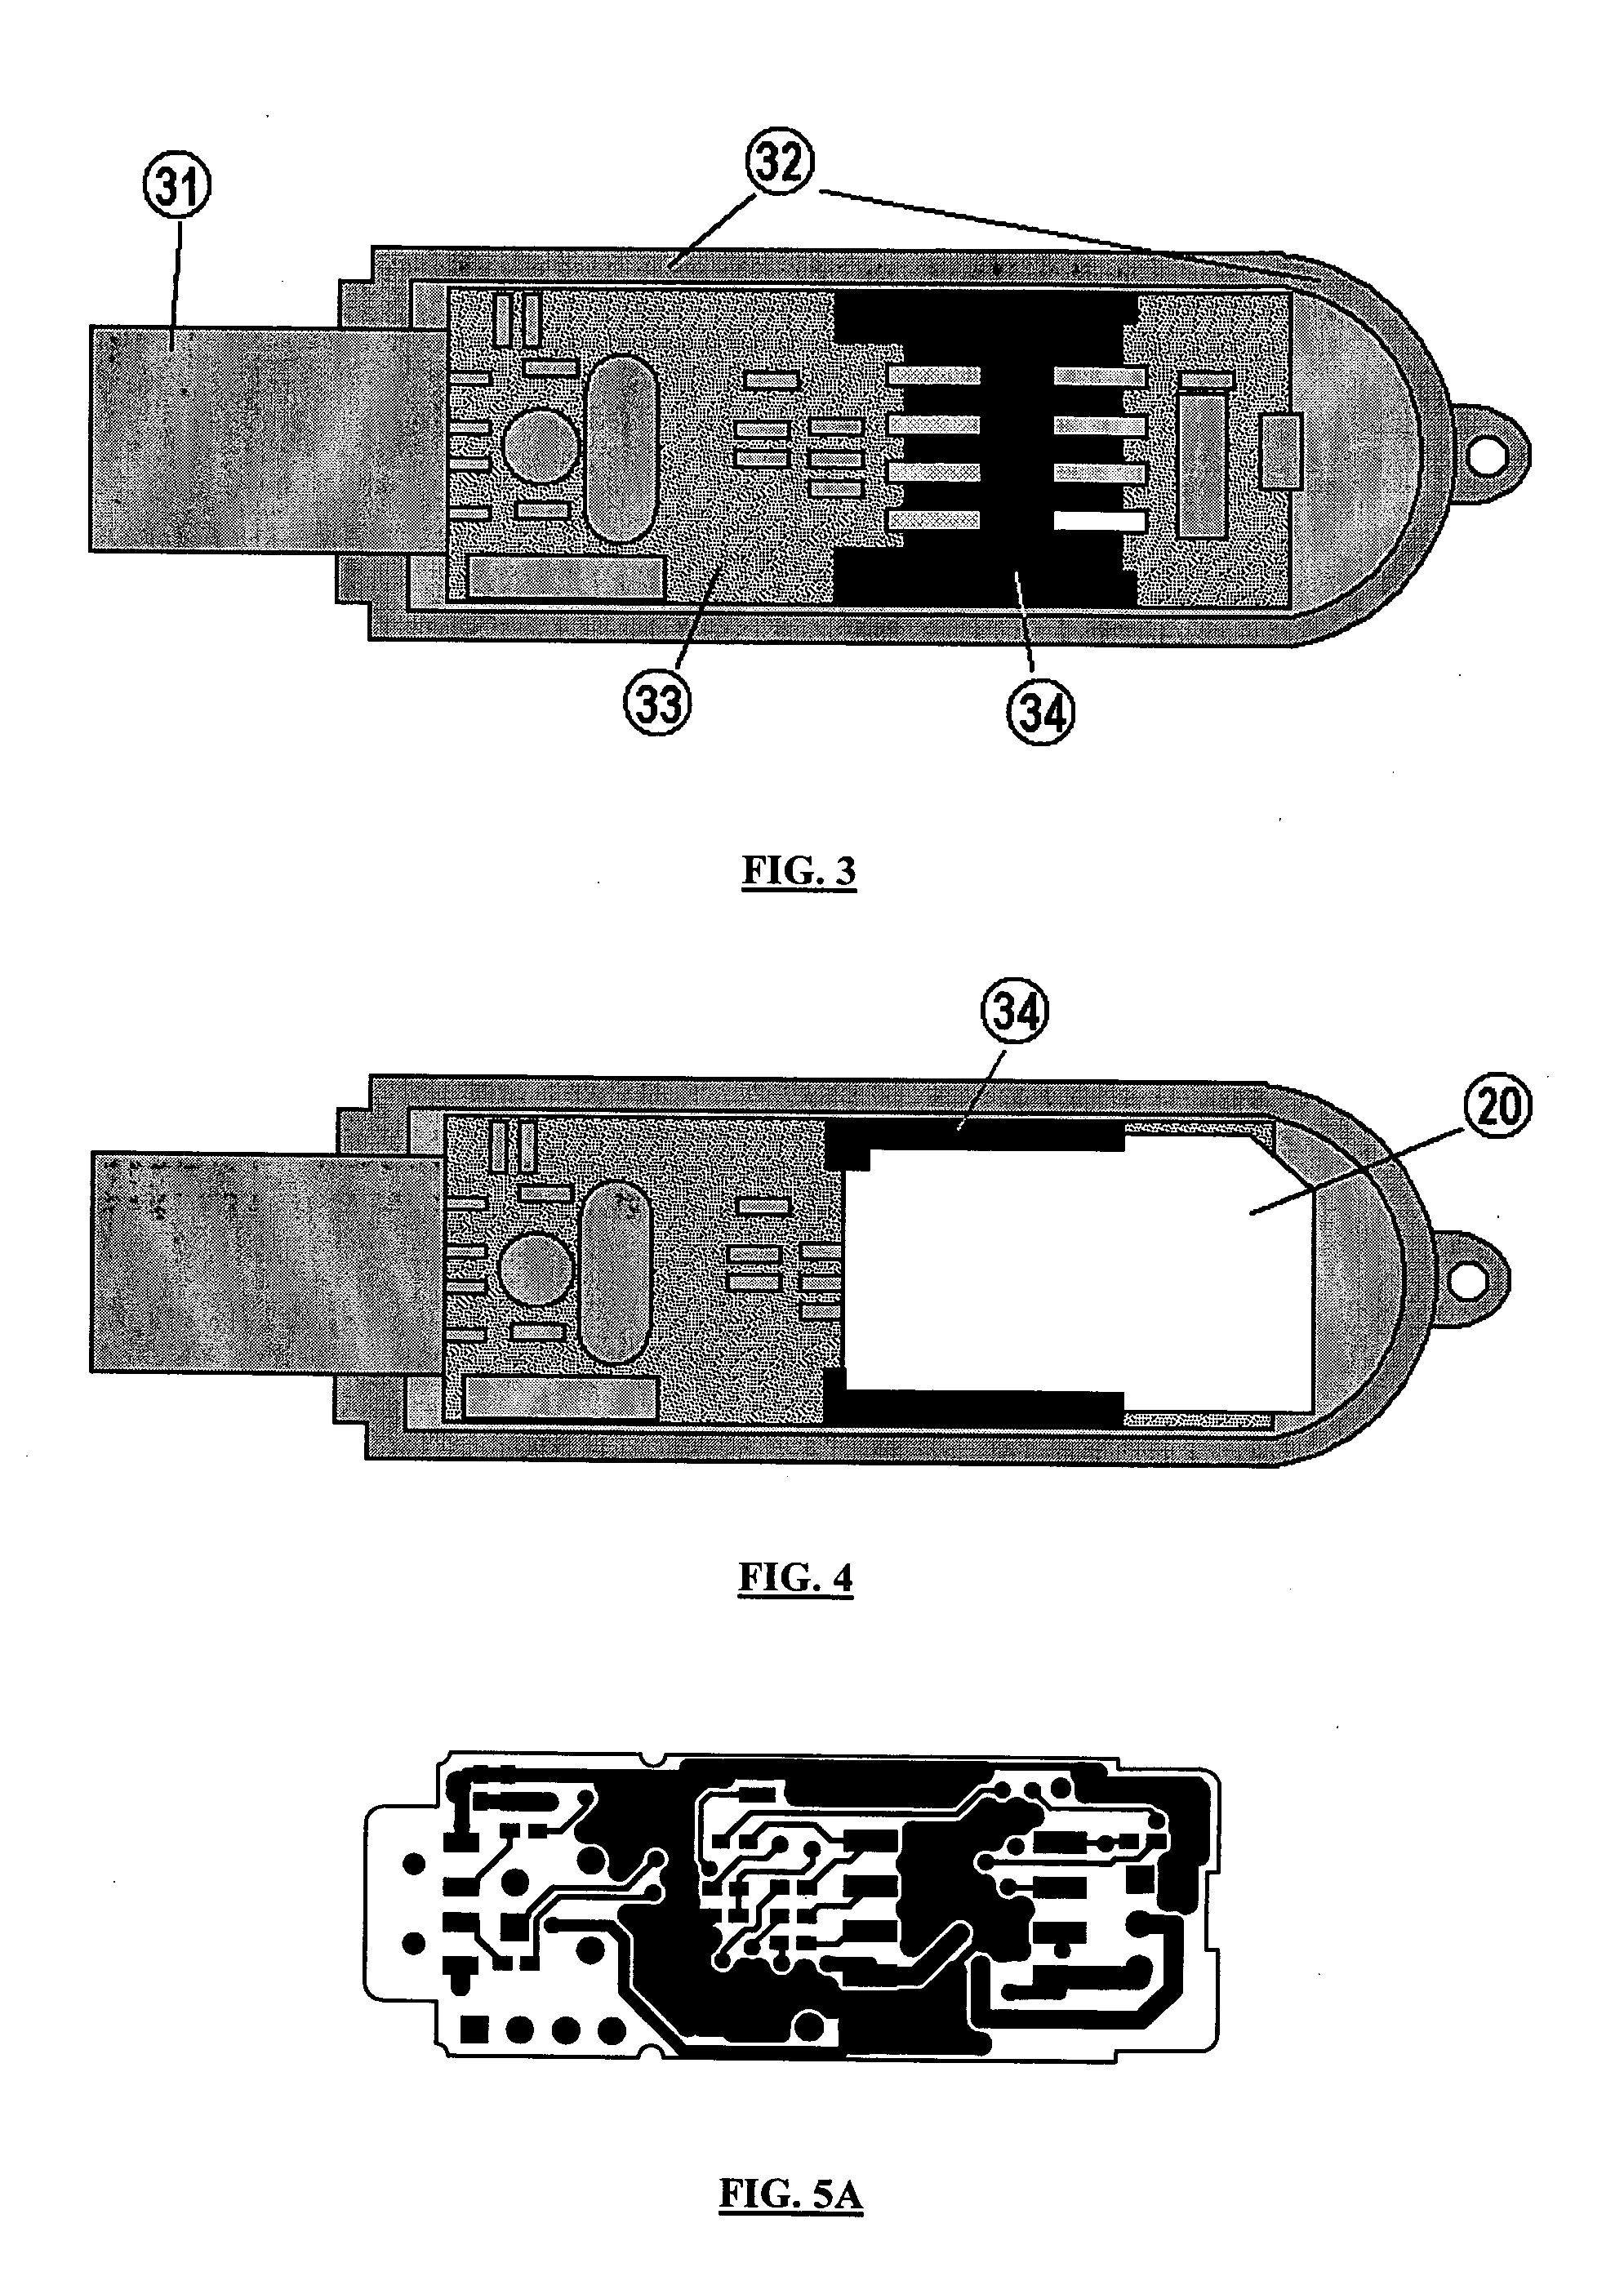 Portable dual-mode contact and contactless communication device